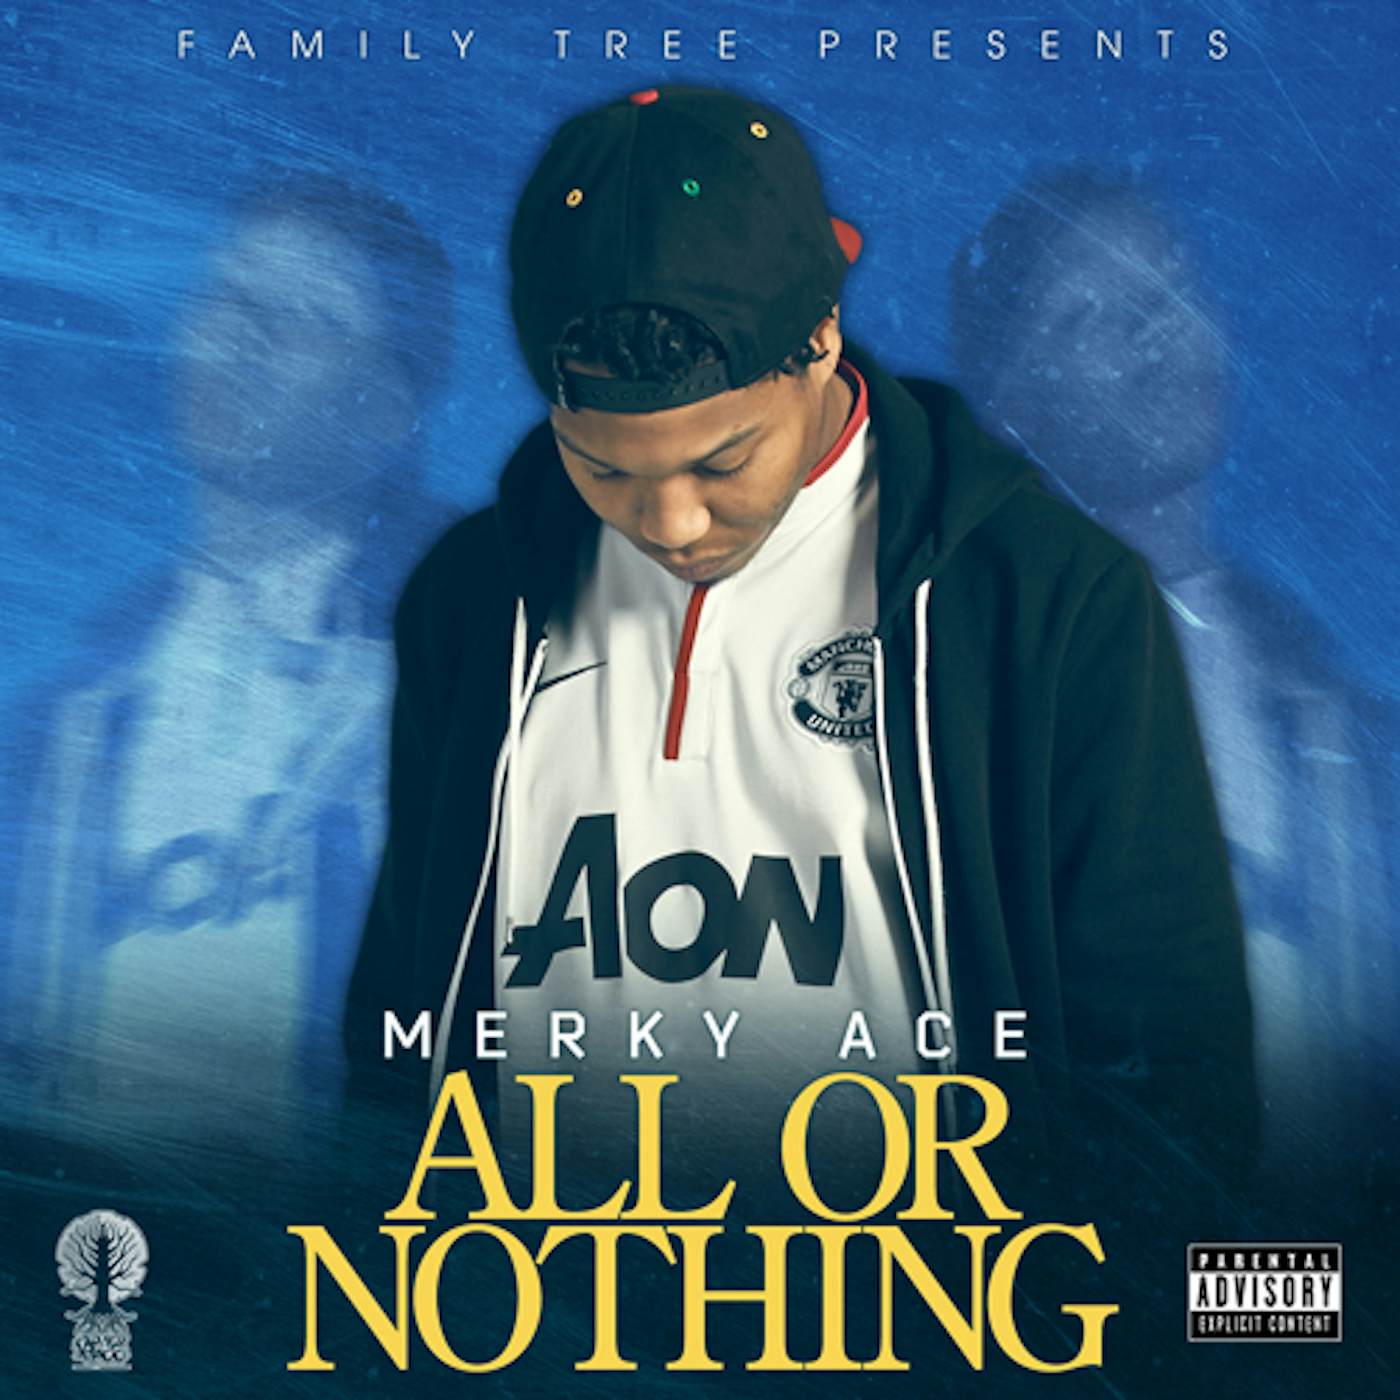 Merky ACE ALL OR NOTHING CD